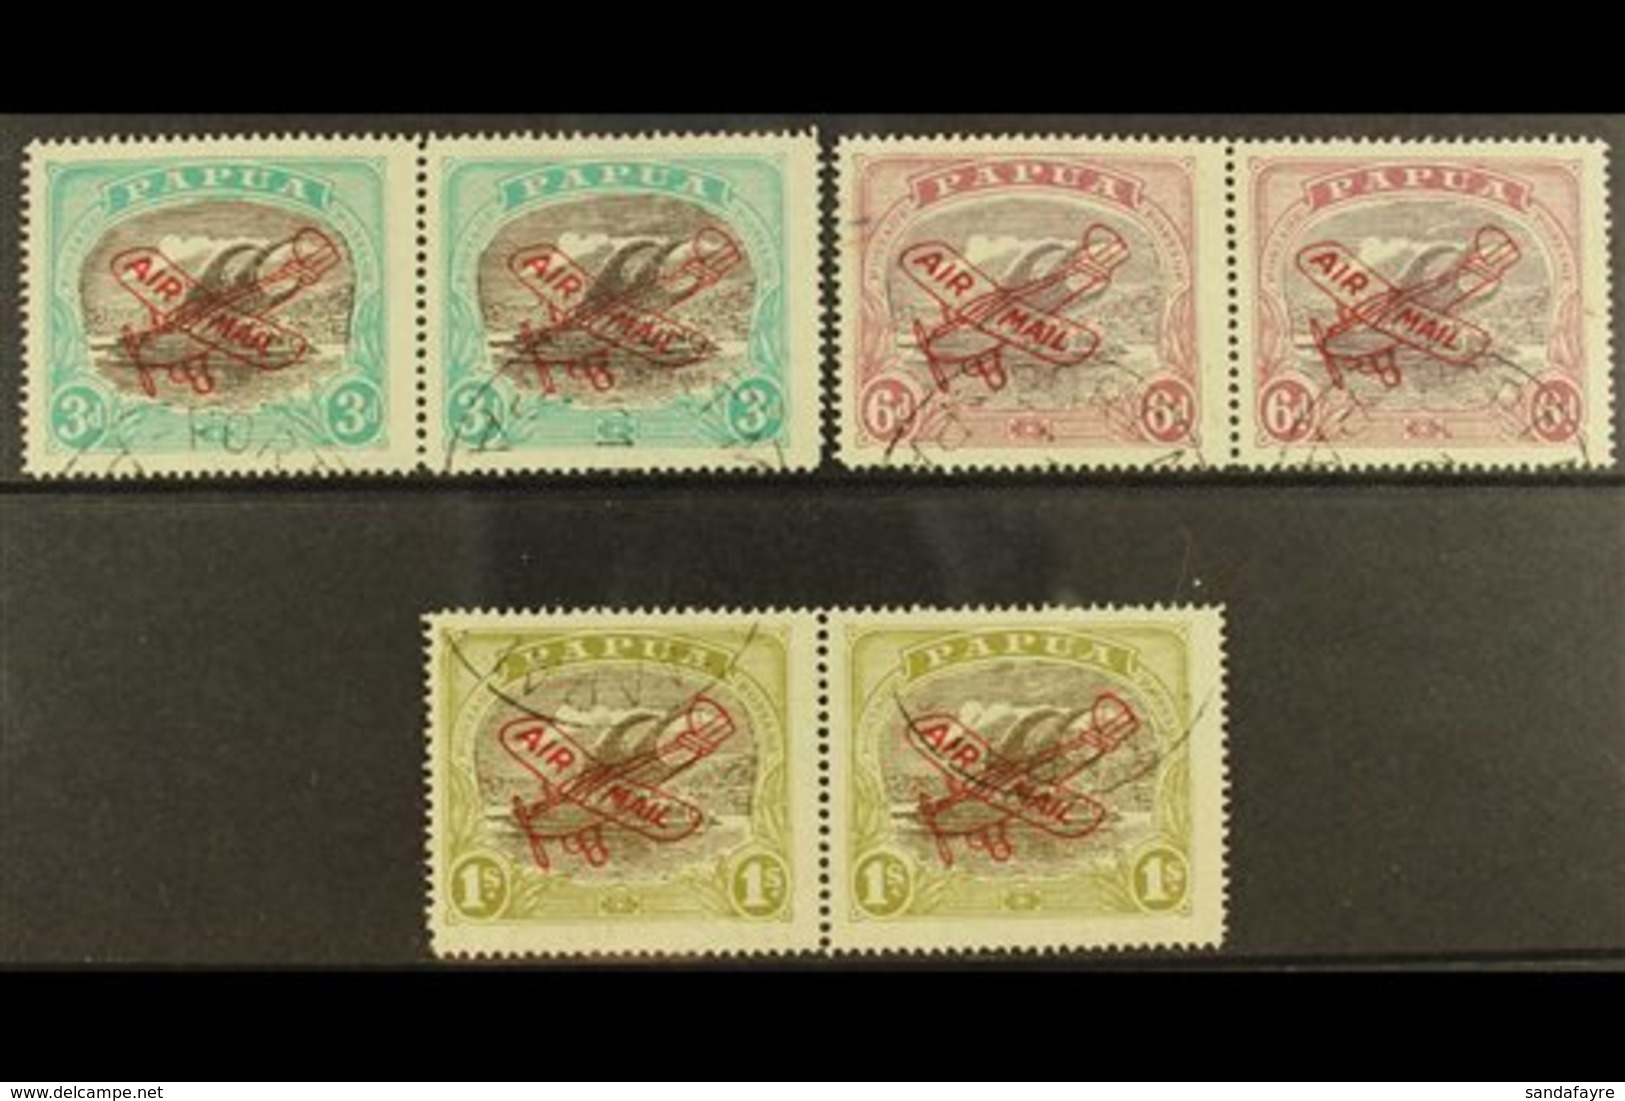 1930  Air Set, Ash Printing, SG 118-120, Each In A Horizontal Pair With One In Each Showing RIFT IN CLOUD, Fine Cds Used - Papua New Guinea